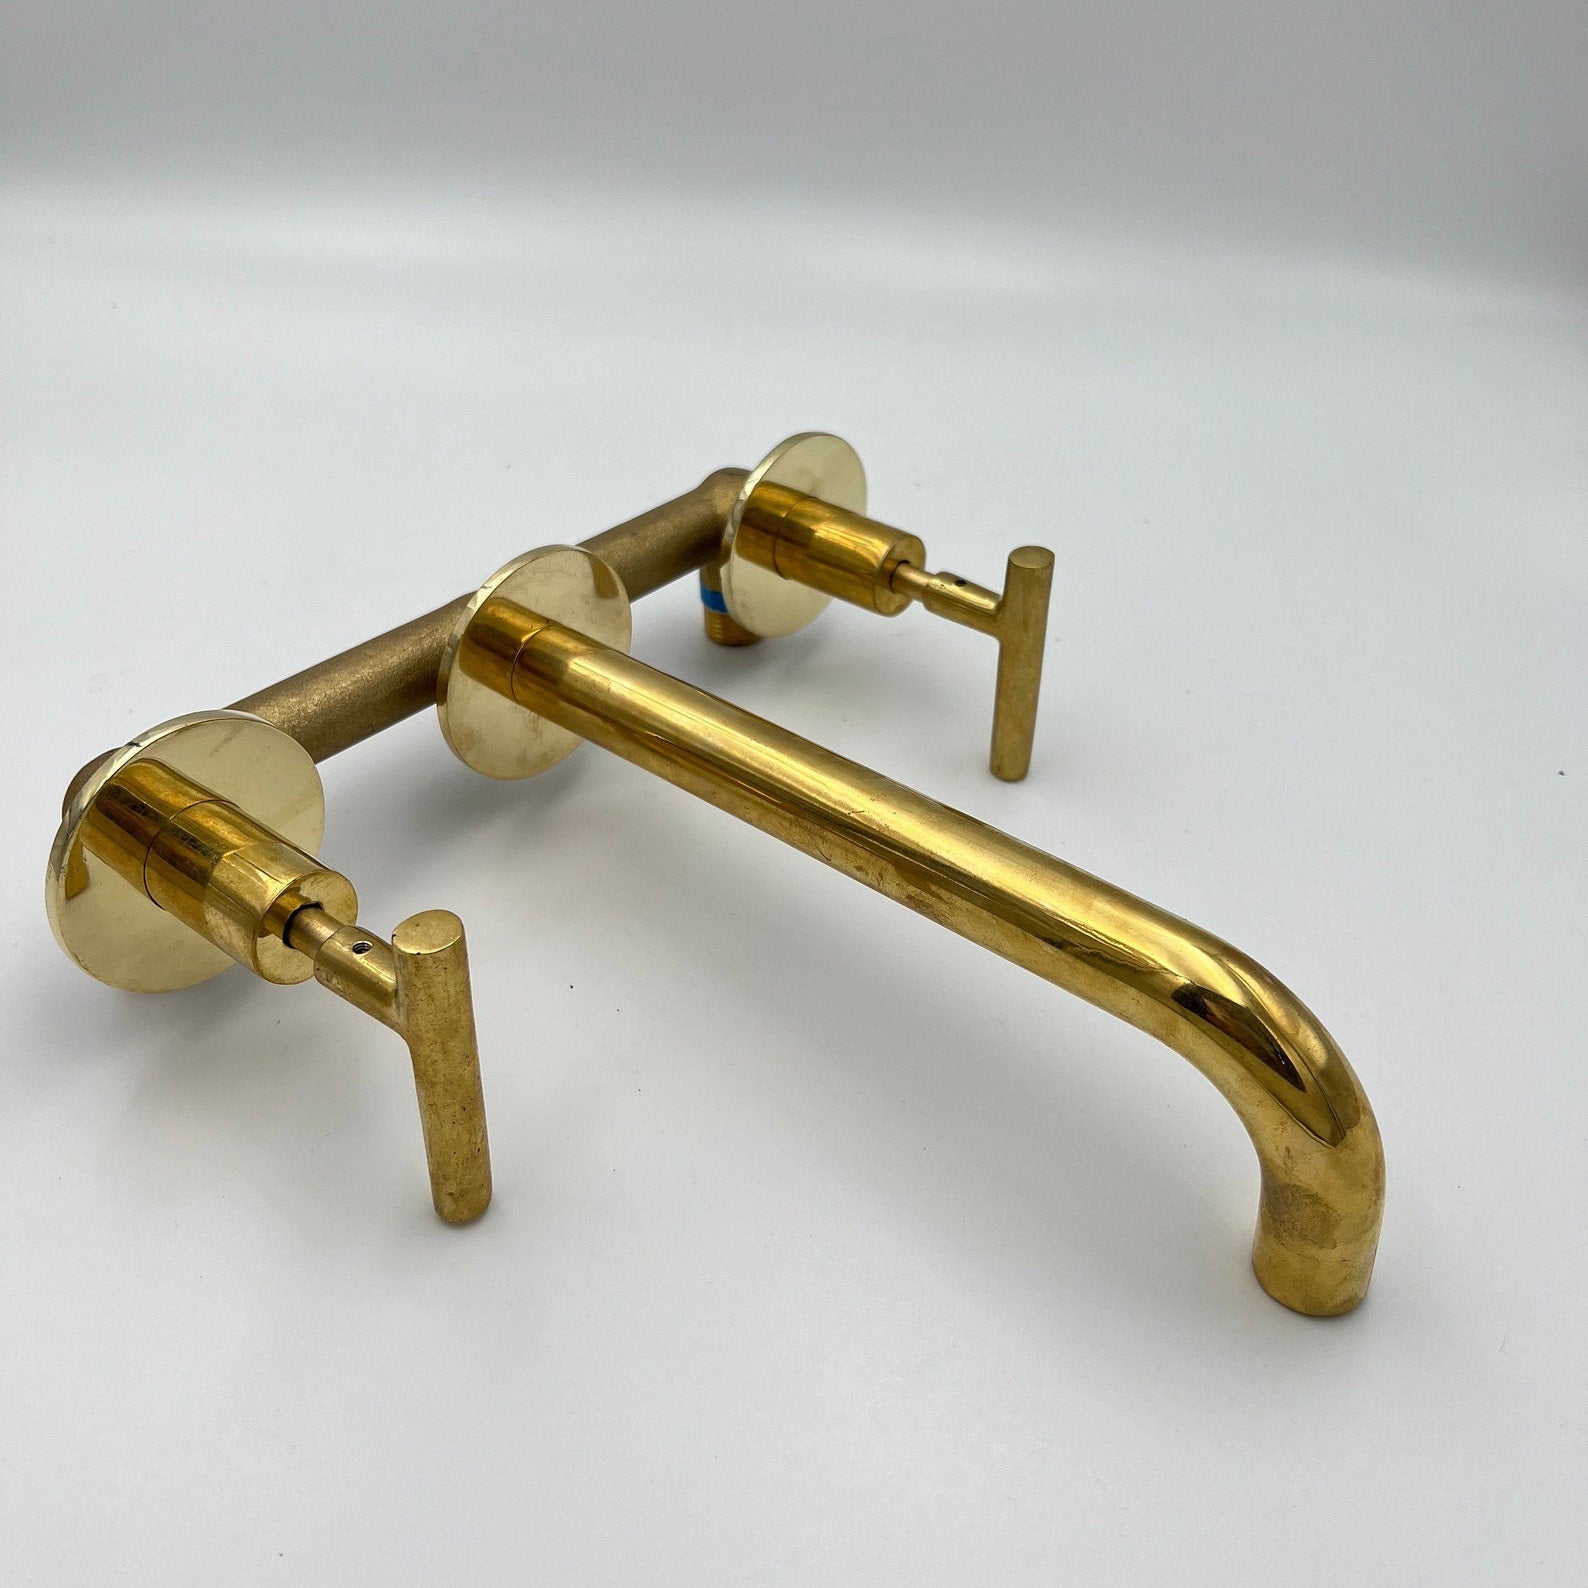 Unlacquered Brass Wall Mount Bathroom Faucet With Lever Handles – OldenGlow